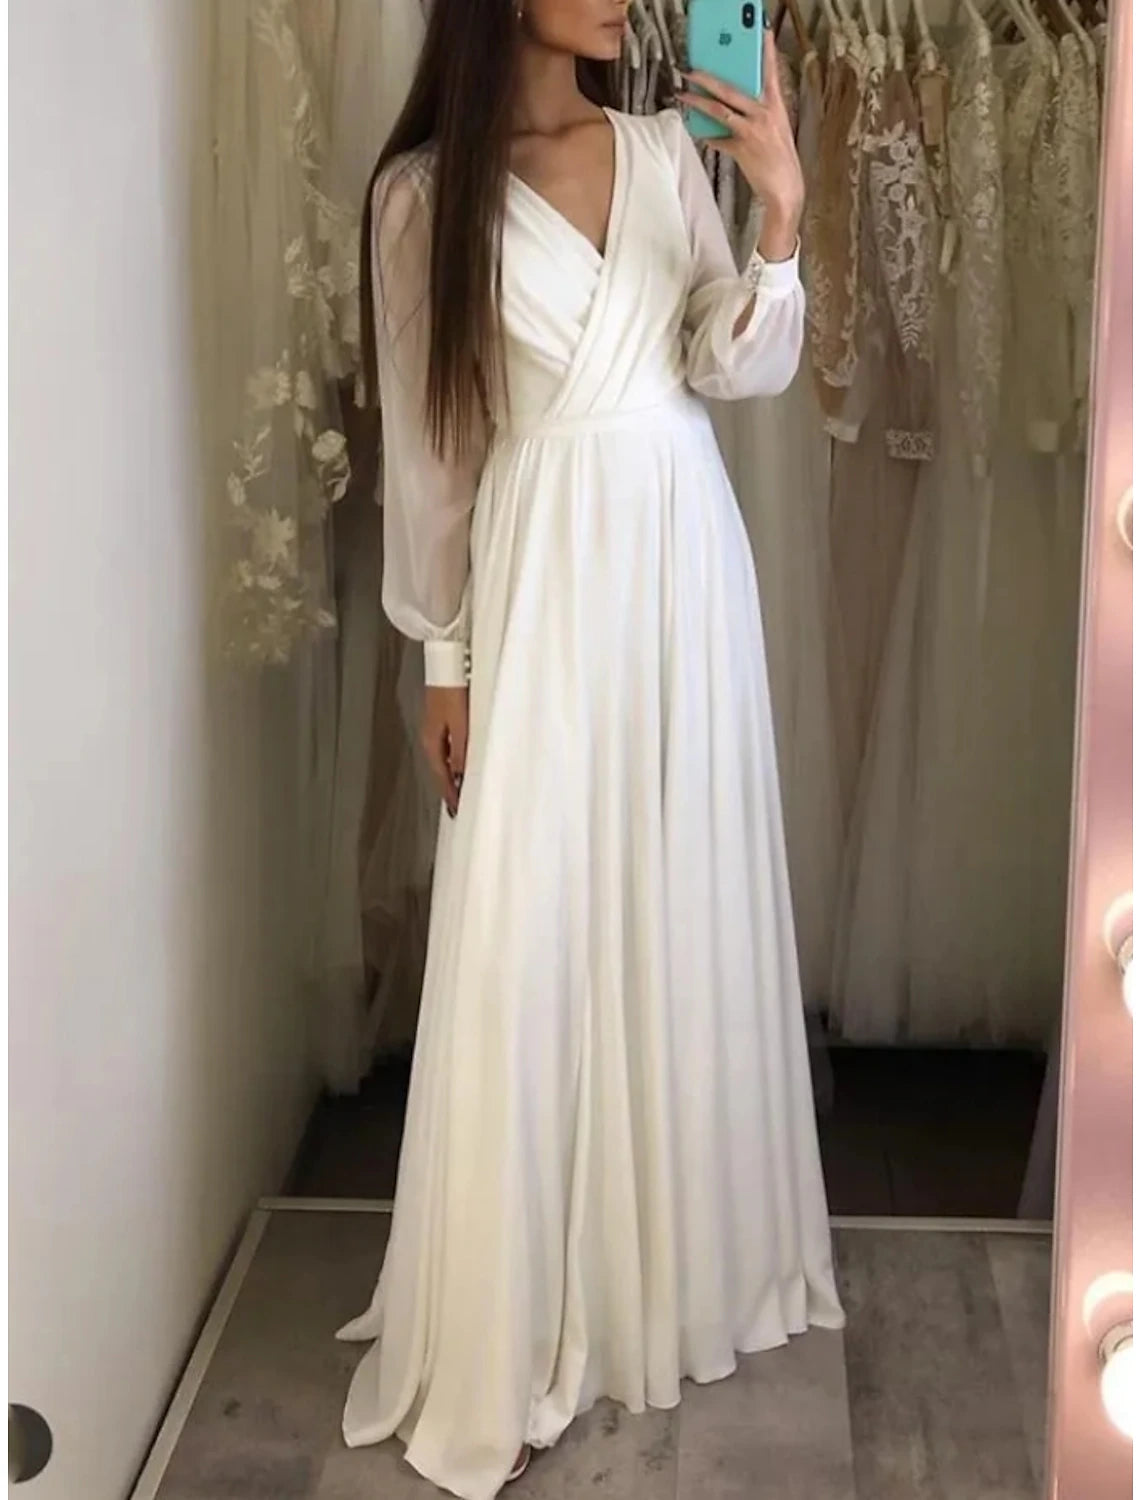 Wholesa Little White Dresses Wedding Dresses A-Line V Neck Long Sleeve Sweep / Brush Train Chiffon Bridal Gowns With Pleats Solid Color